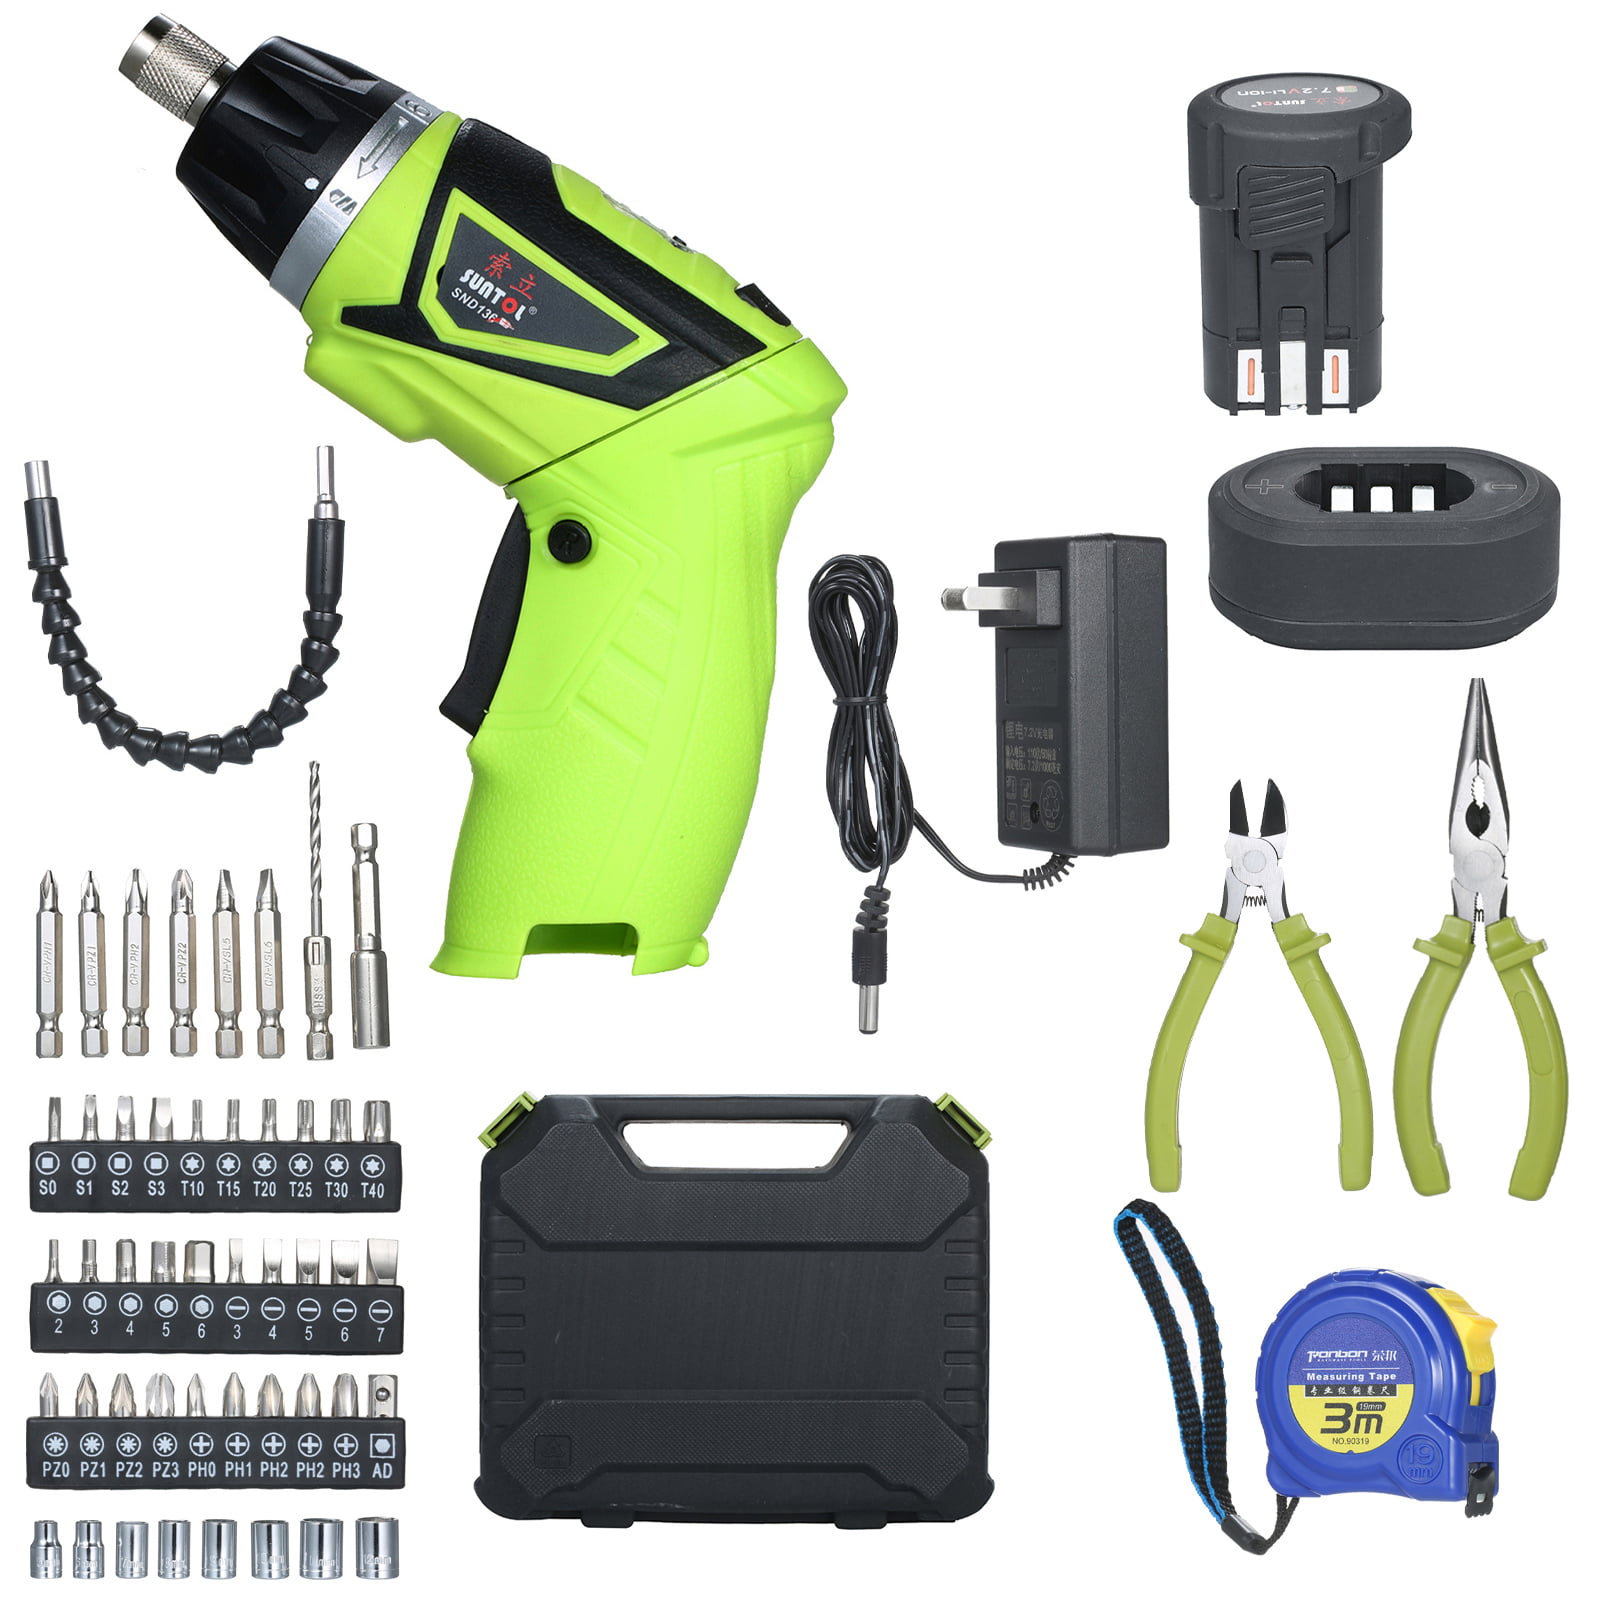 SUNTOL 12V Multi-function Lithium-ion Electric Drill Screwdriver Power Hand Tool 